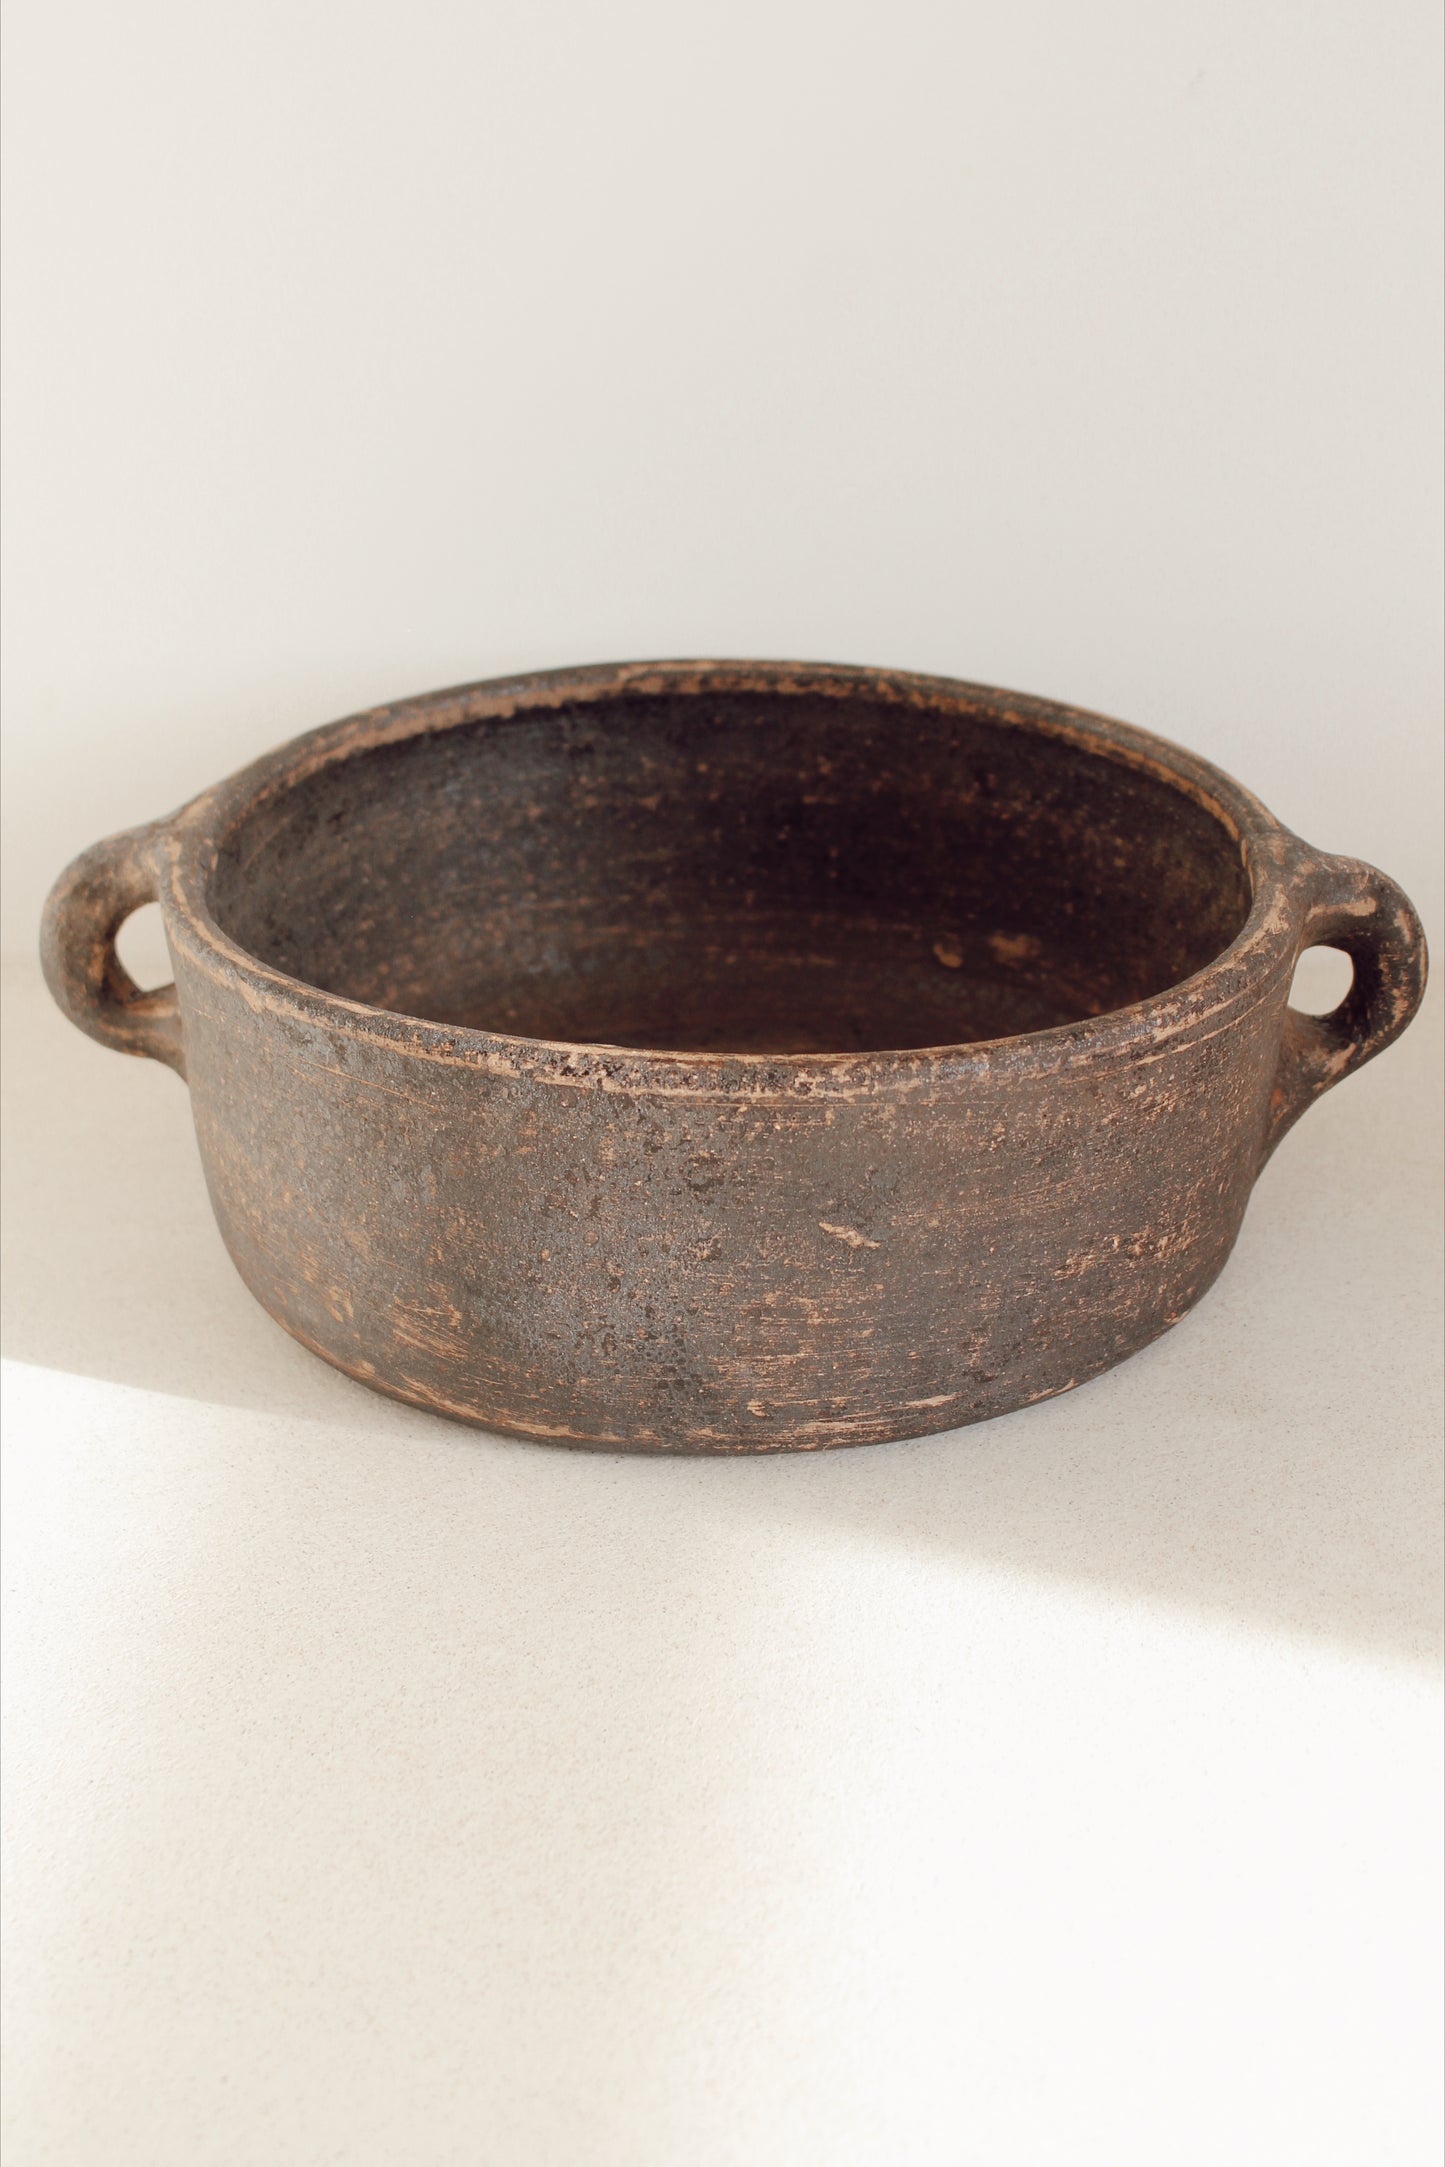 Earthern cooking tray